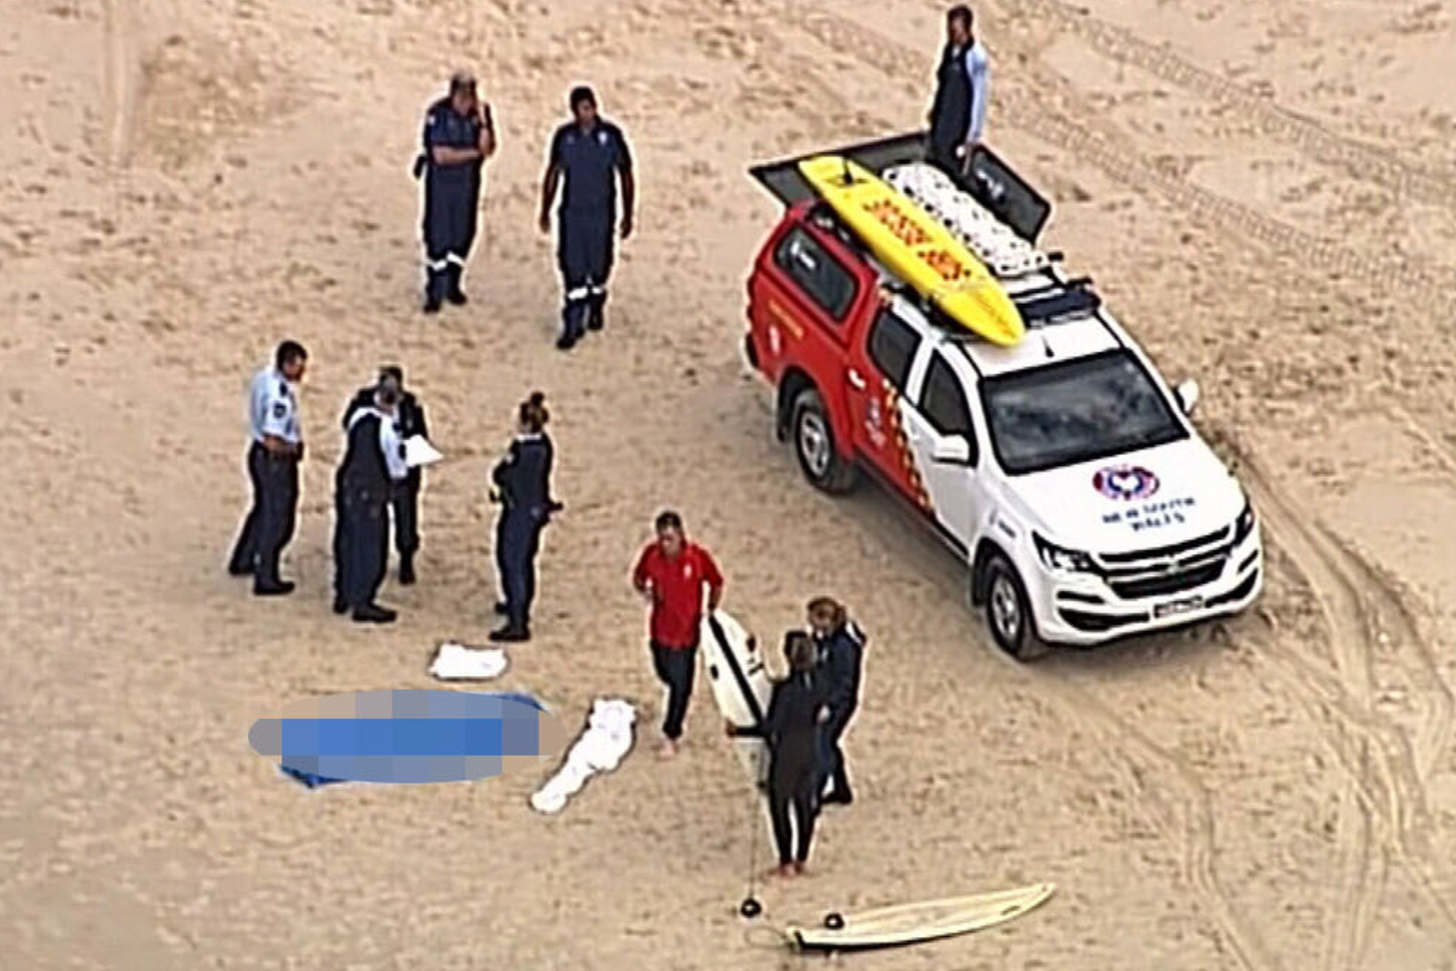 A male surfer has died after being bitten by a shark near Kingscliff in northern NSW